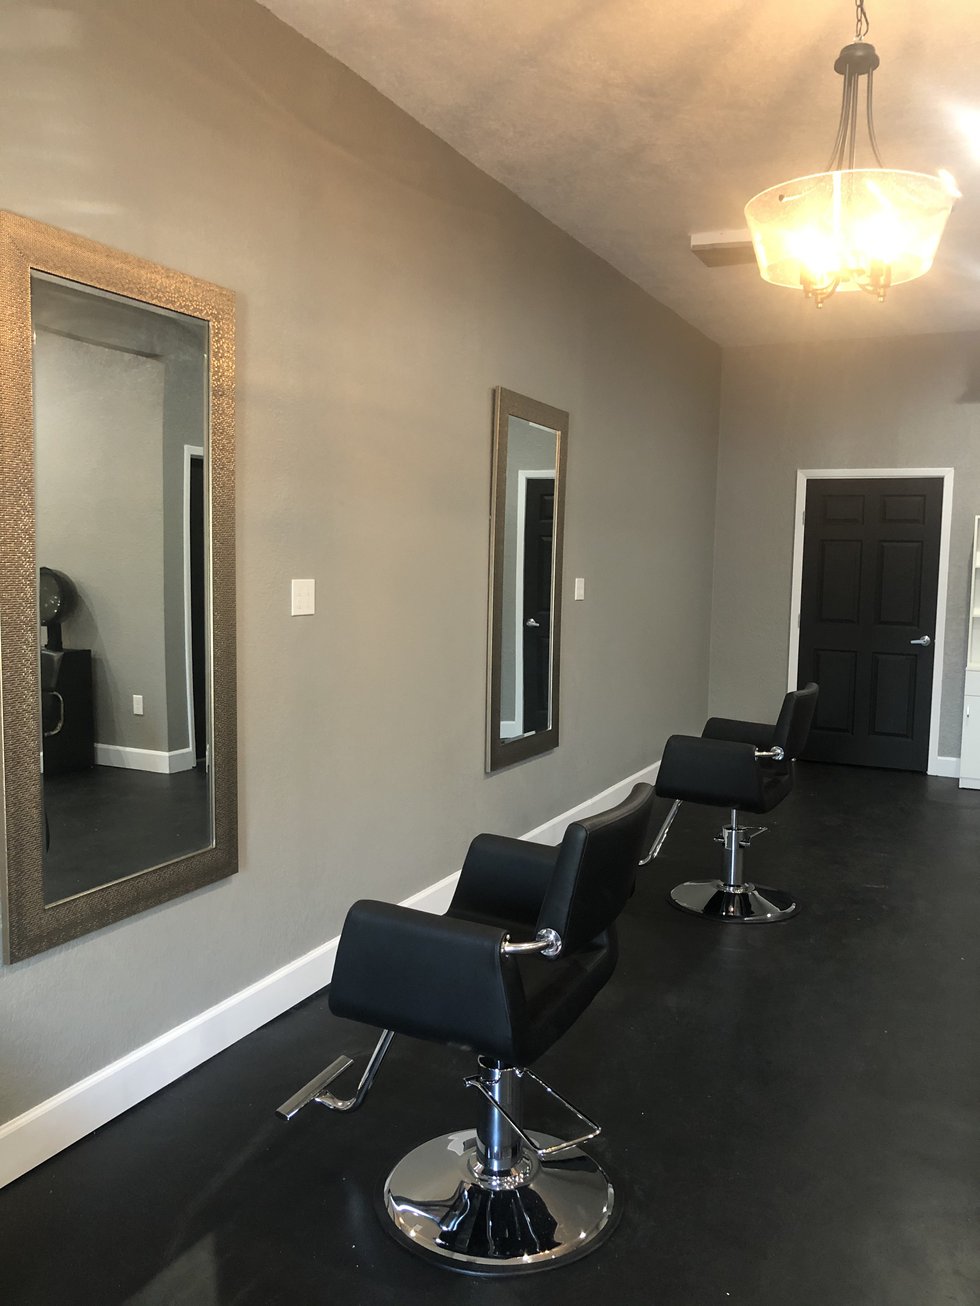 Fort Worth's Newest Salon Will Specialize in Textured Hair - Fort Worth